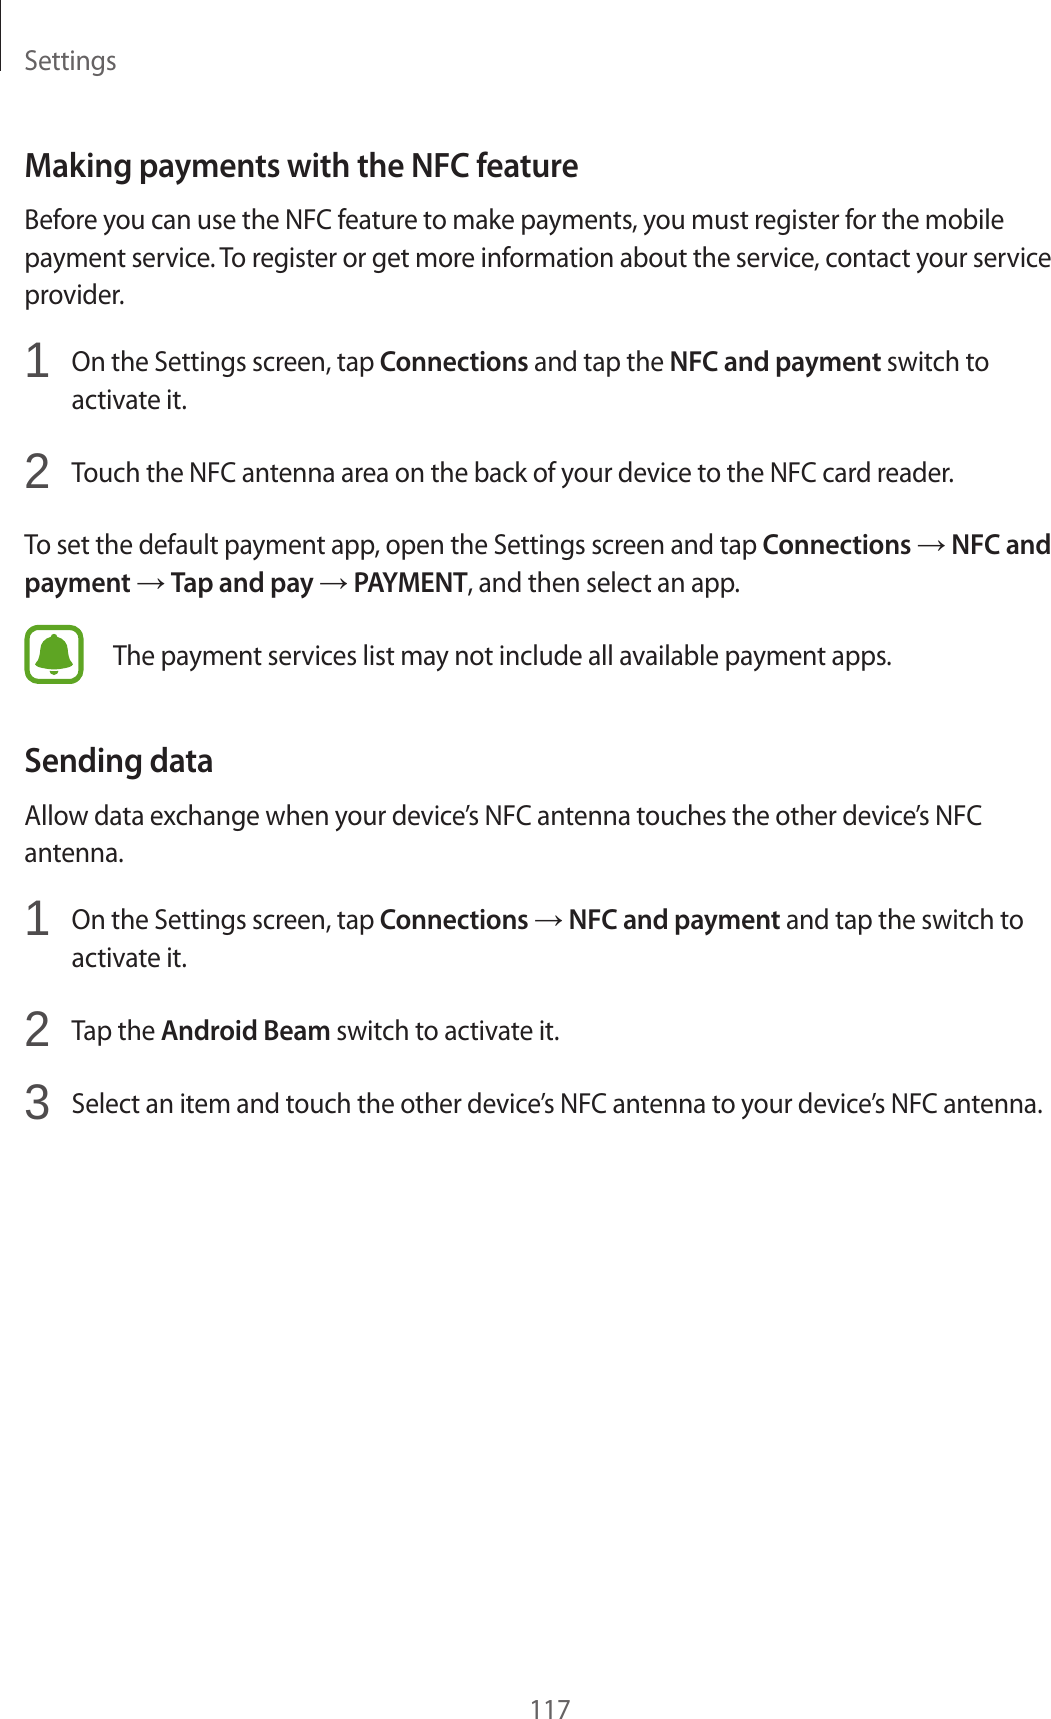 Settings117Making payments with the NFC featureBefore you can use the NFC feature to make payments, you must register for the mobile payment service. To register or get more information about the service, contact your service provider.1  On the Settings screen, tap Connections and tap the NFC and payment switch to activate it.2  Touch the NFC antenna area on the back of your device to the NFC card reader.To set the default payment app, open the Settings screen and tap Connections → NFC and payment → Tap and pay → PAYMENT, and then select an app.The payment services list may not include all available payment apps.Sending dataAllow data exchange when your device’s NFC antenna touches the other device’s NFC antenna.1  On the Settings screen, tap Connections → NFC and payment and tap the switch to activate it.2  Tap the Android Beam switch to activate it.3  Select an item and touch the other device’s NFC antenna to your device’s NFC antenna.